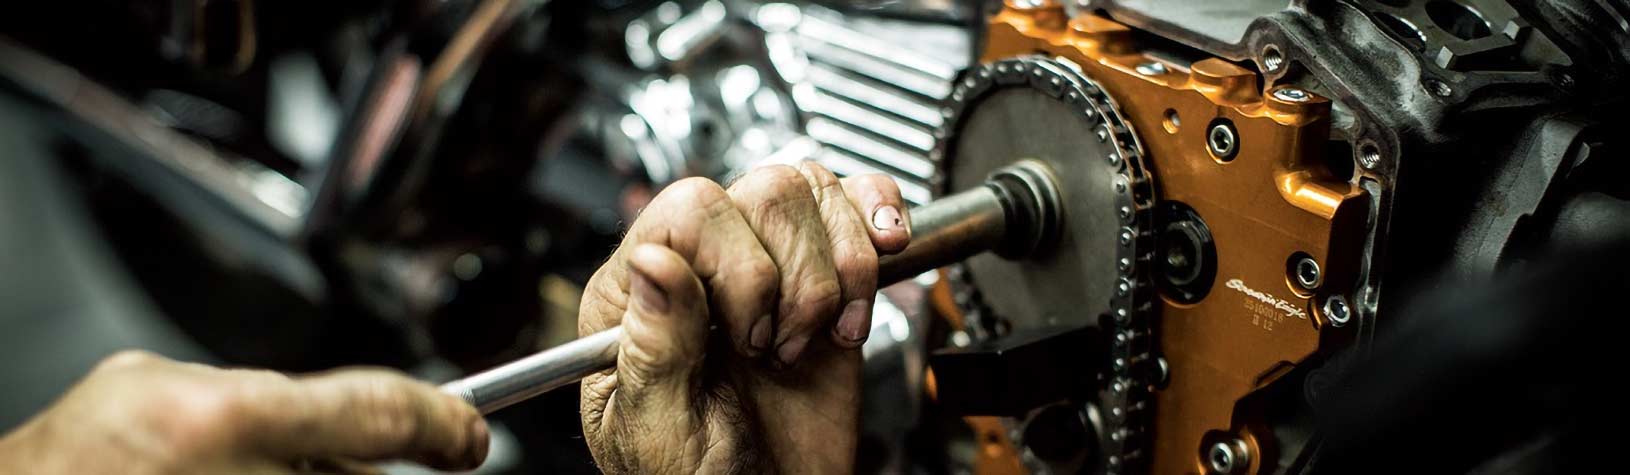 A closeup of a hand turning a tool on an engine.